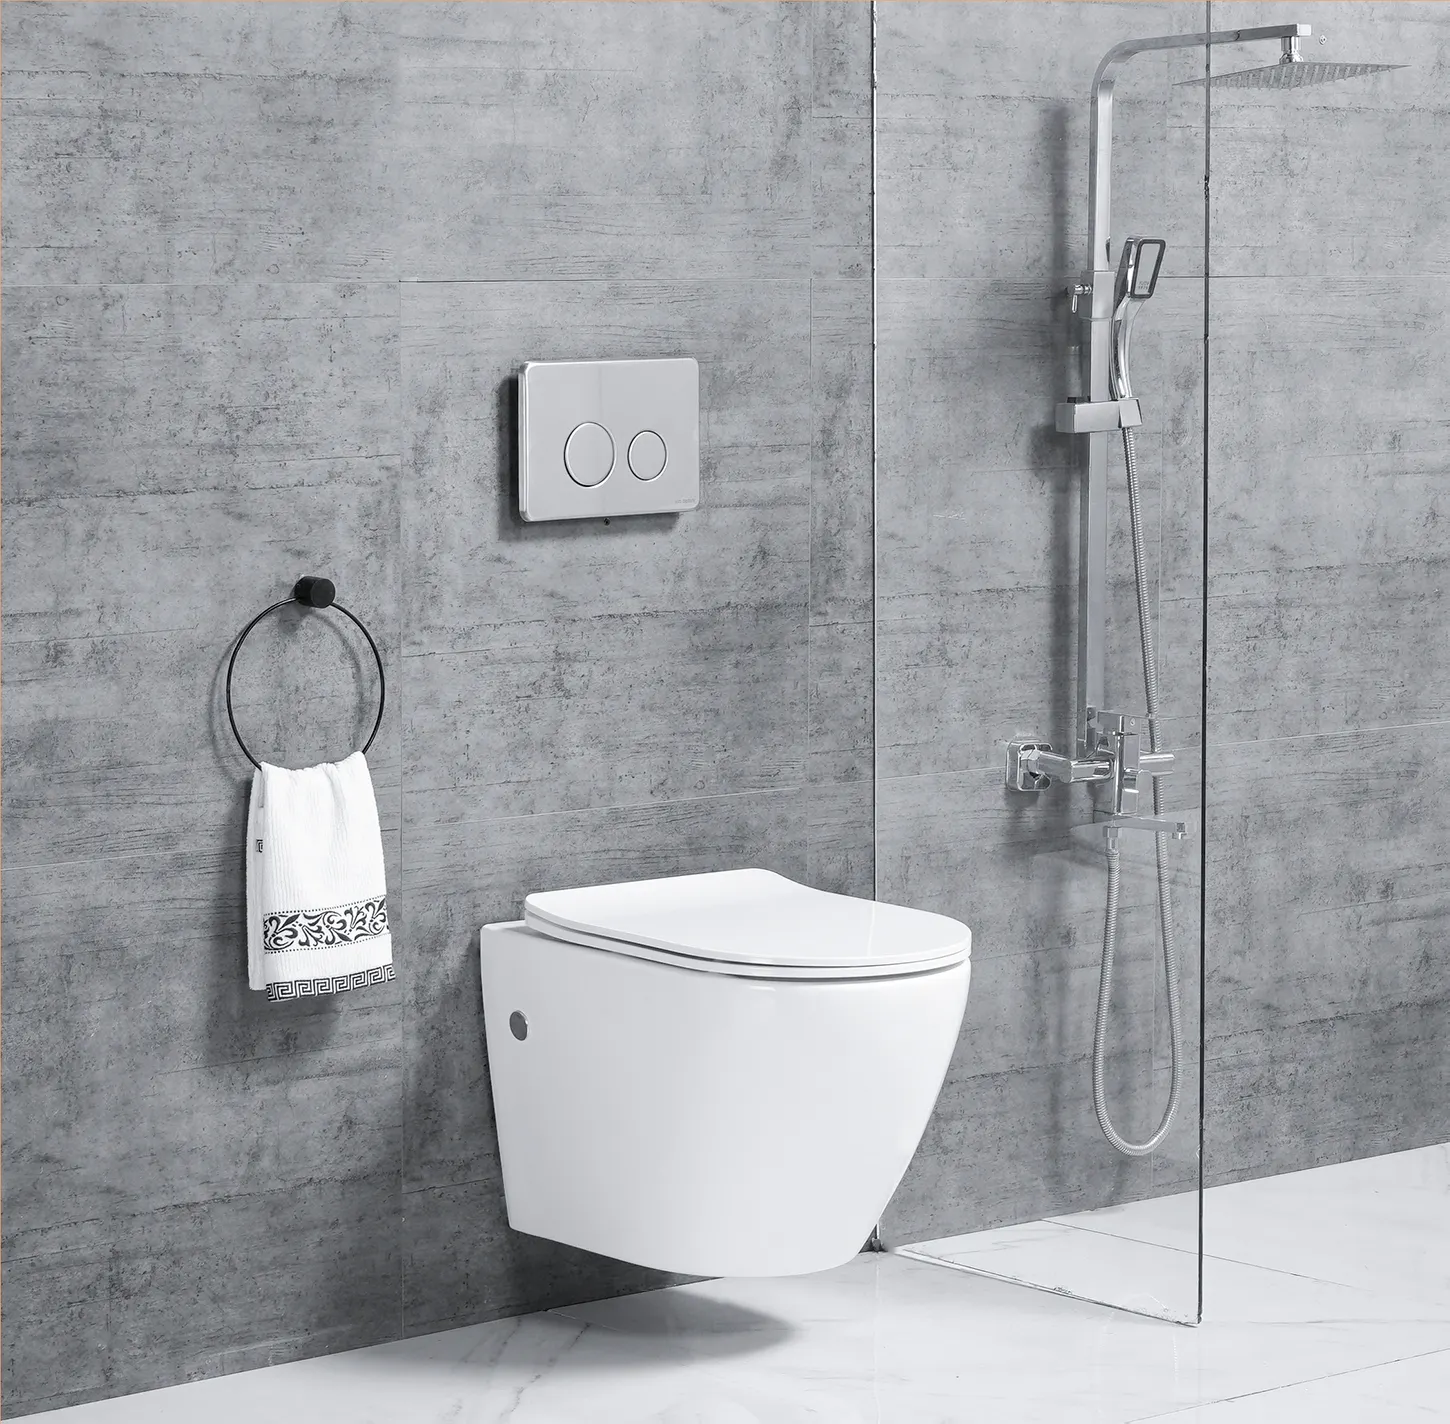 High Quality Standard Wall Hung Toilets Sanitary Ware Concealed Tank Modern Design Rimless Flushing